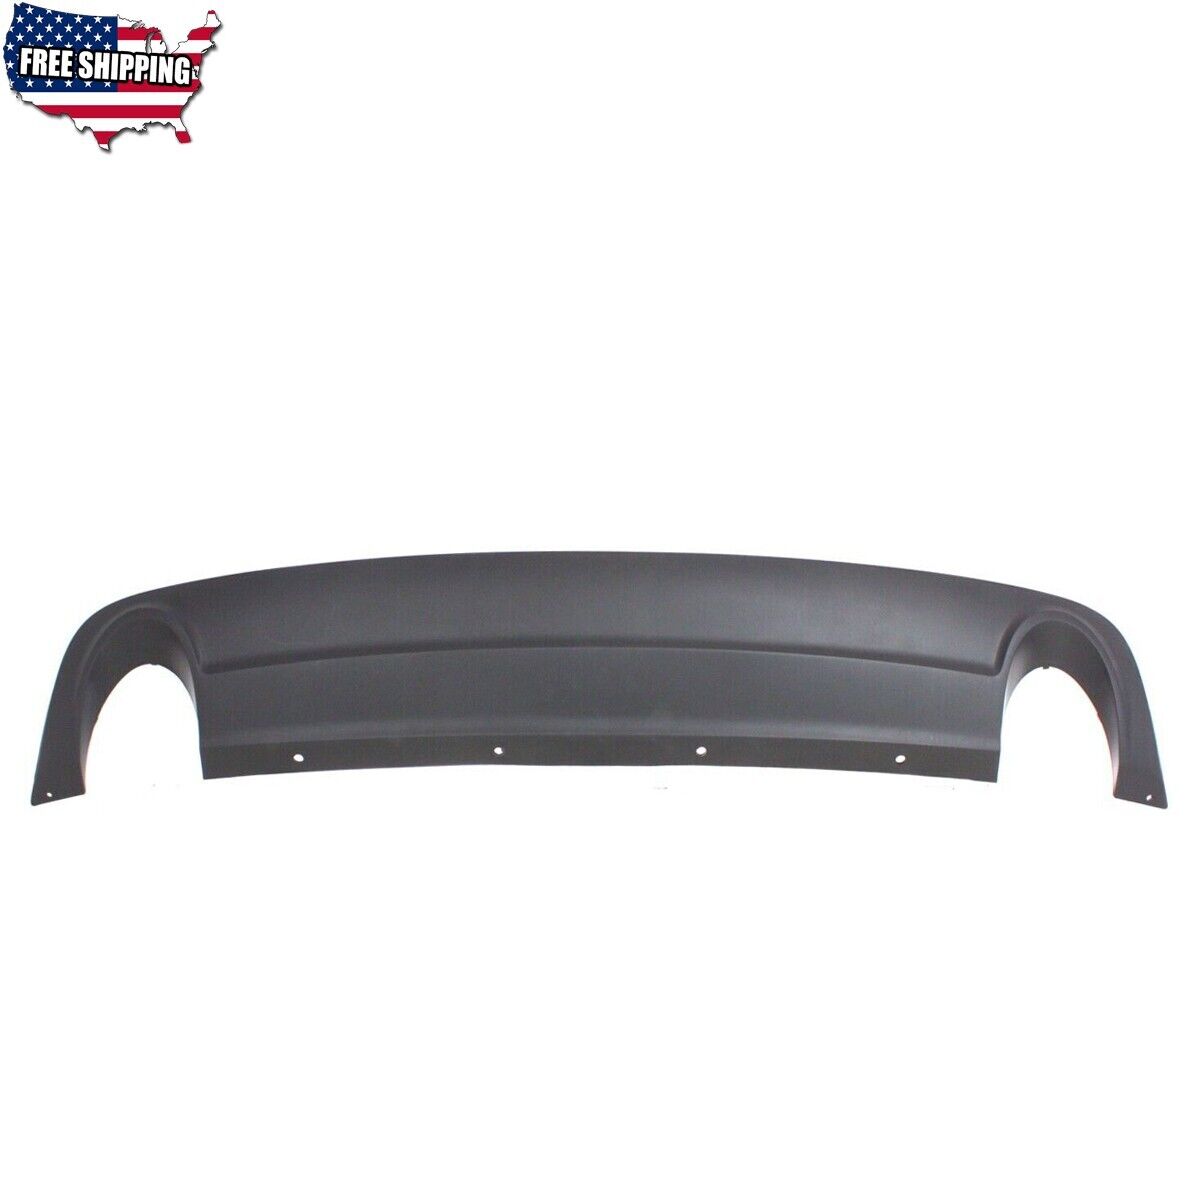 New Rear Lower Valance Panel Textured For 2008-2012 Chevrolet Malibu GM1195111